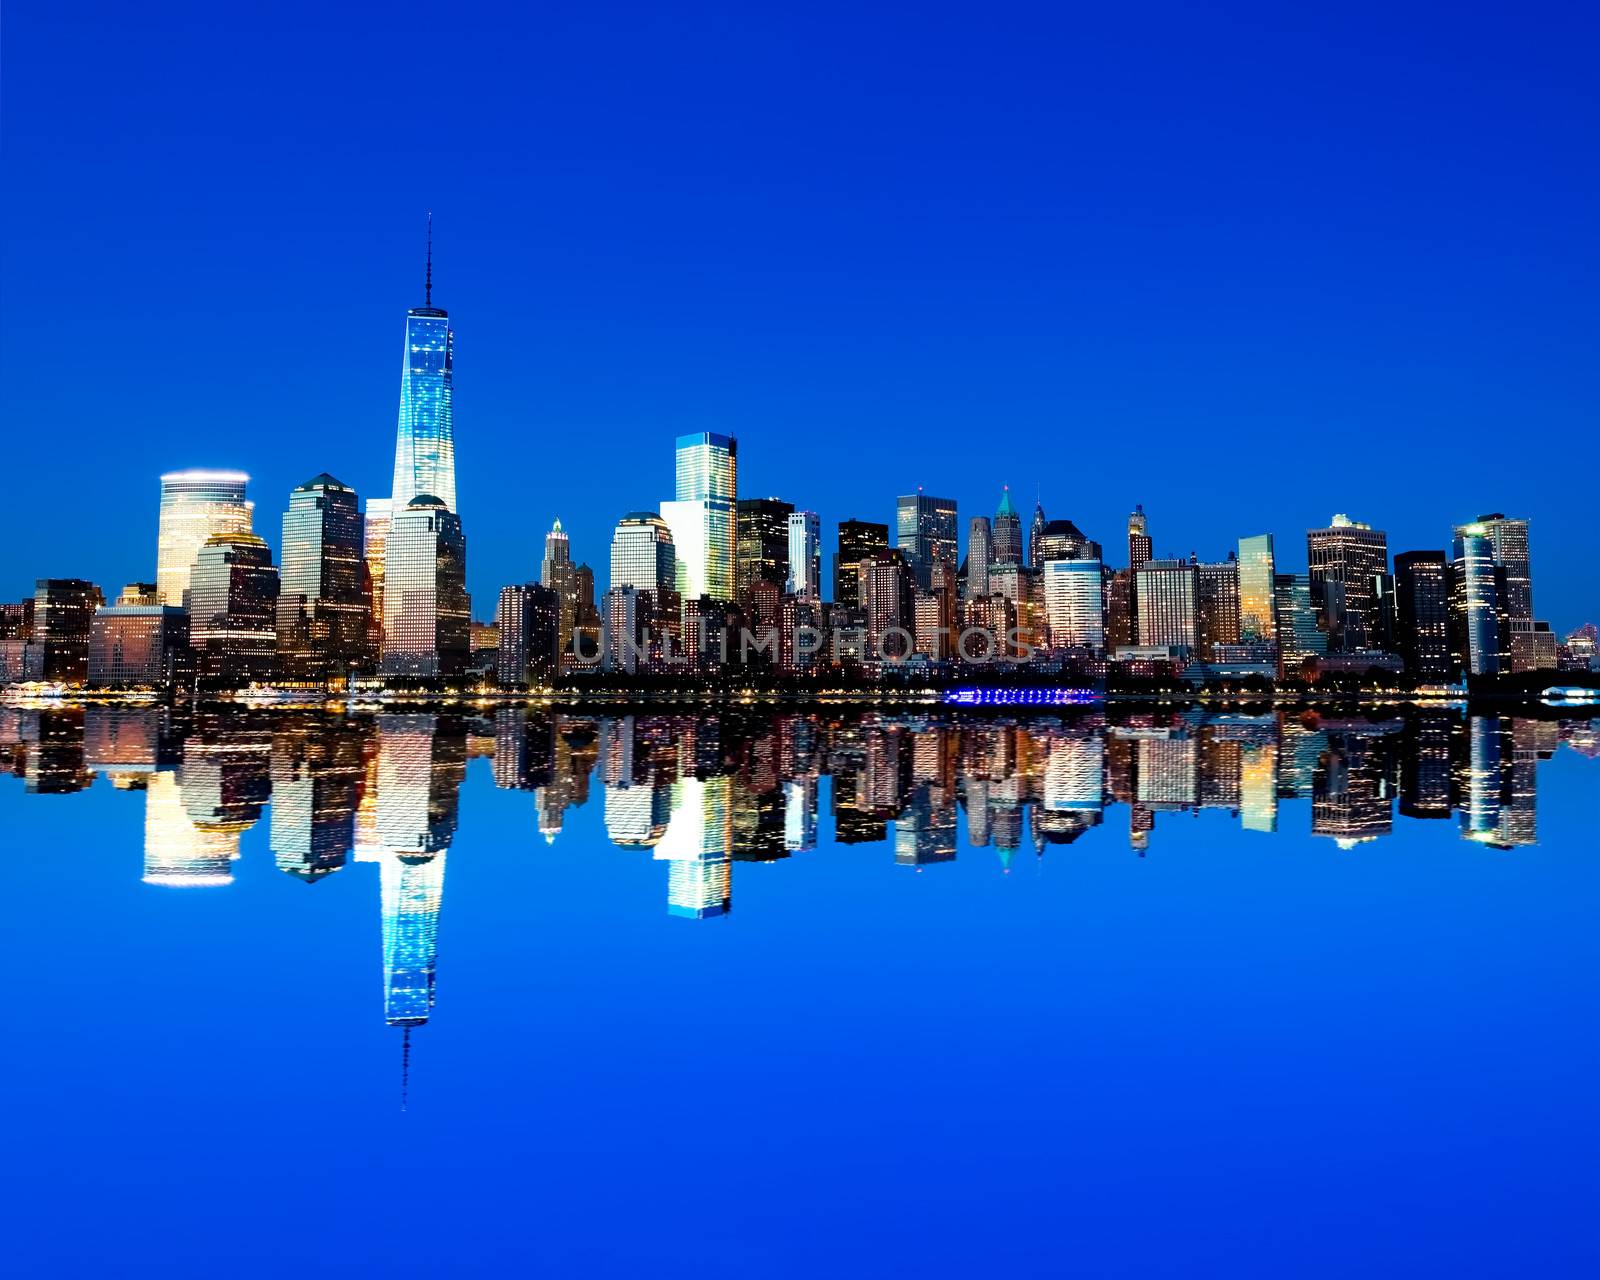 The new Freedom Tower and Lower Manhattan Skyline at Night